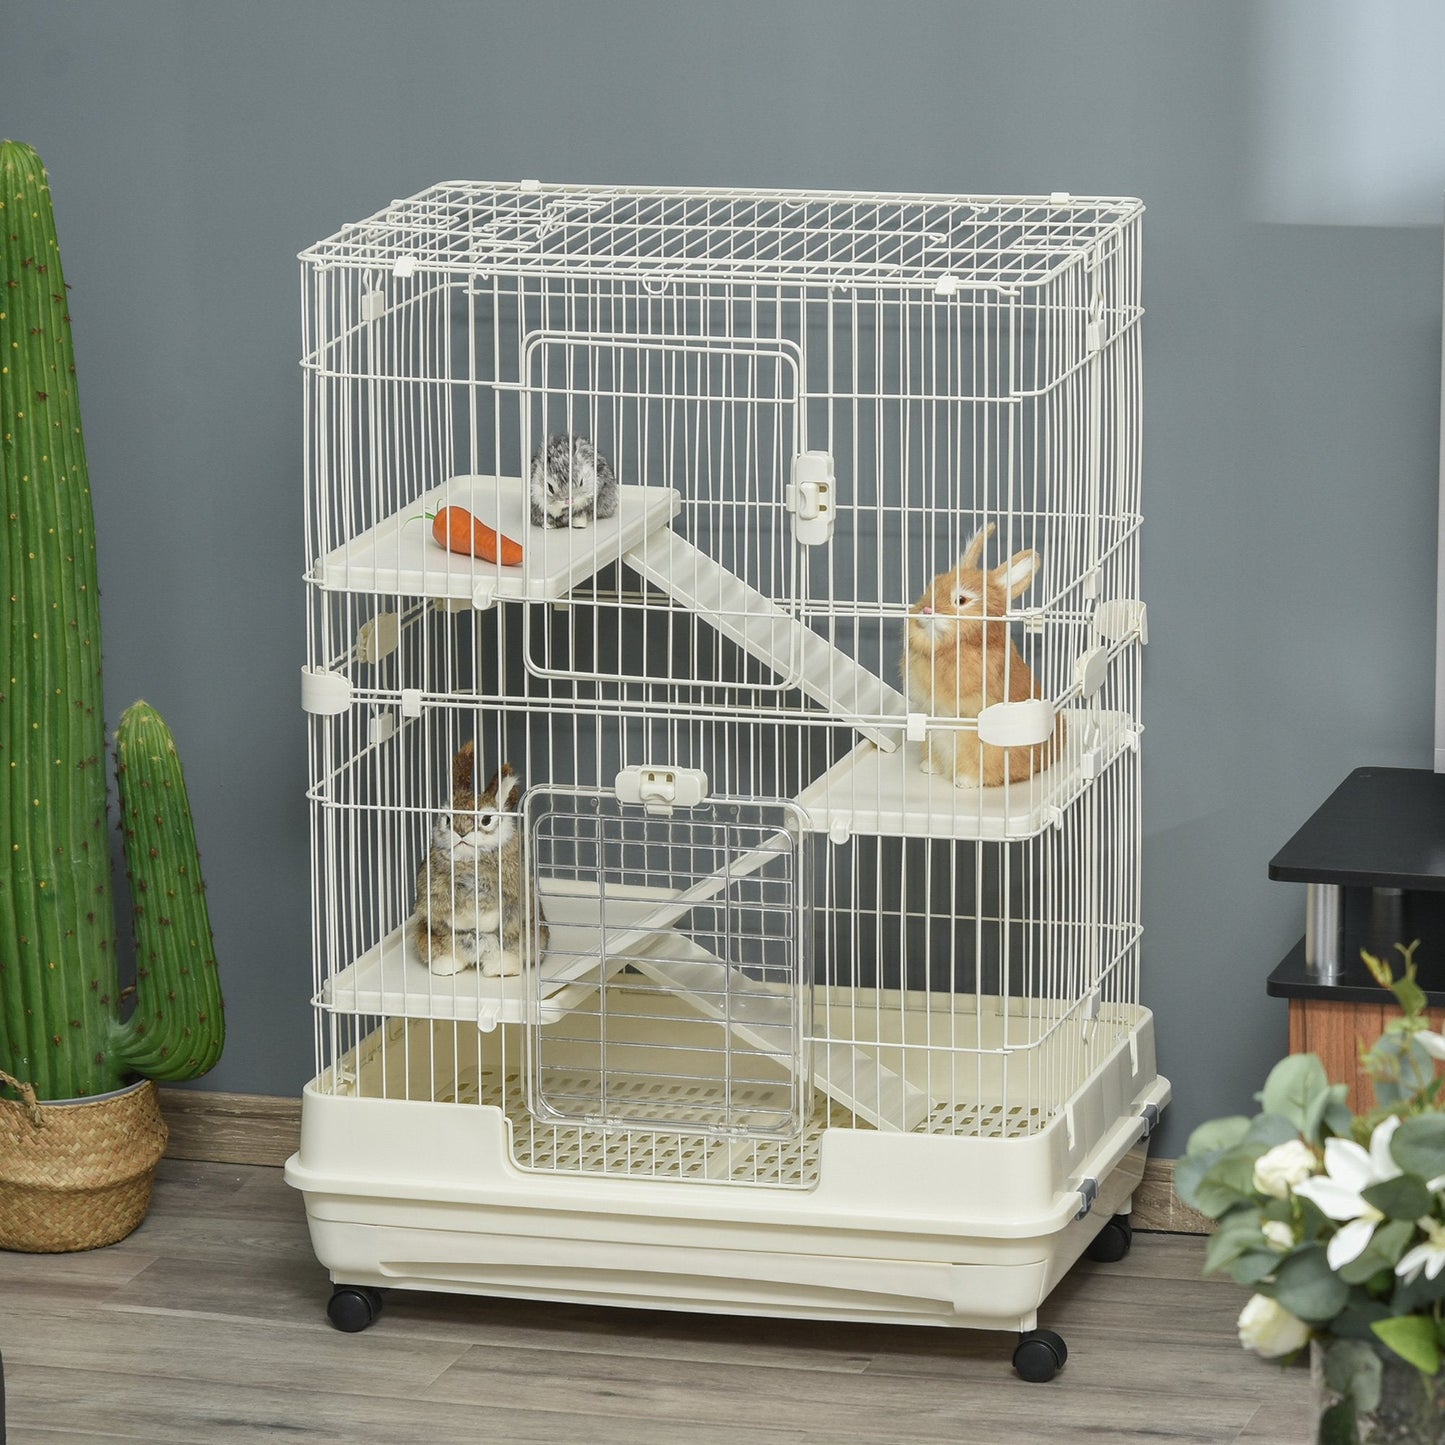 -PawHut 32"L 4-Level Small Animal Cage, Rabbit Hutch with Universal Lockable Wheels & Slide-out Tray for Bunny, Chinchillas & Ferret, White - Outdoor Style Company